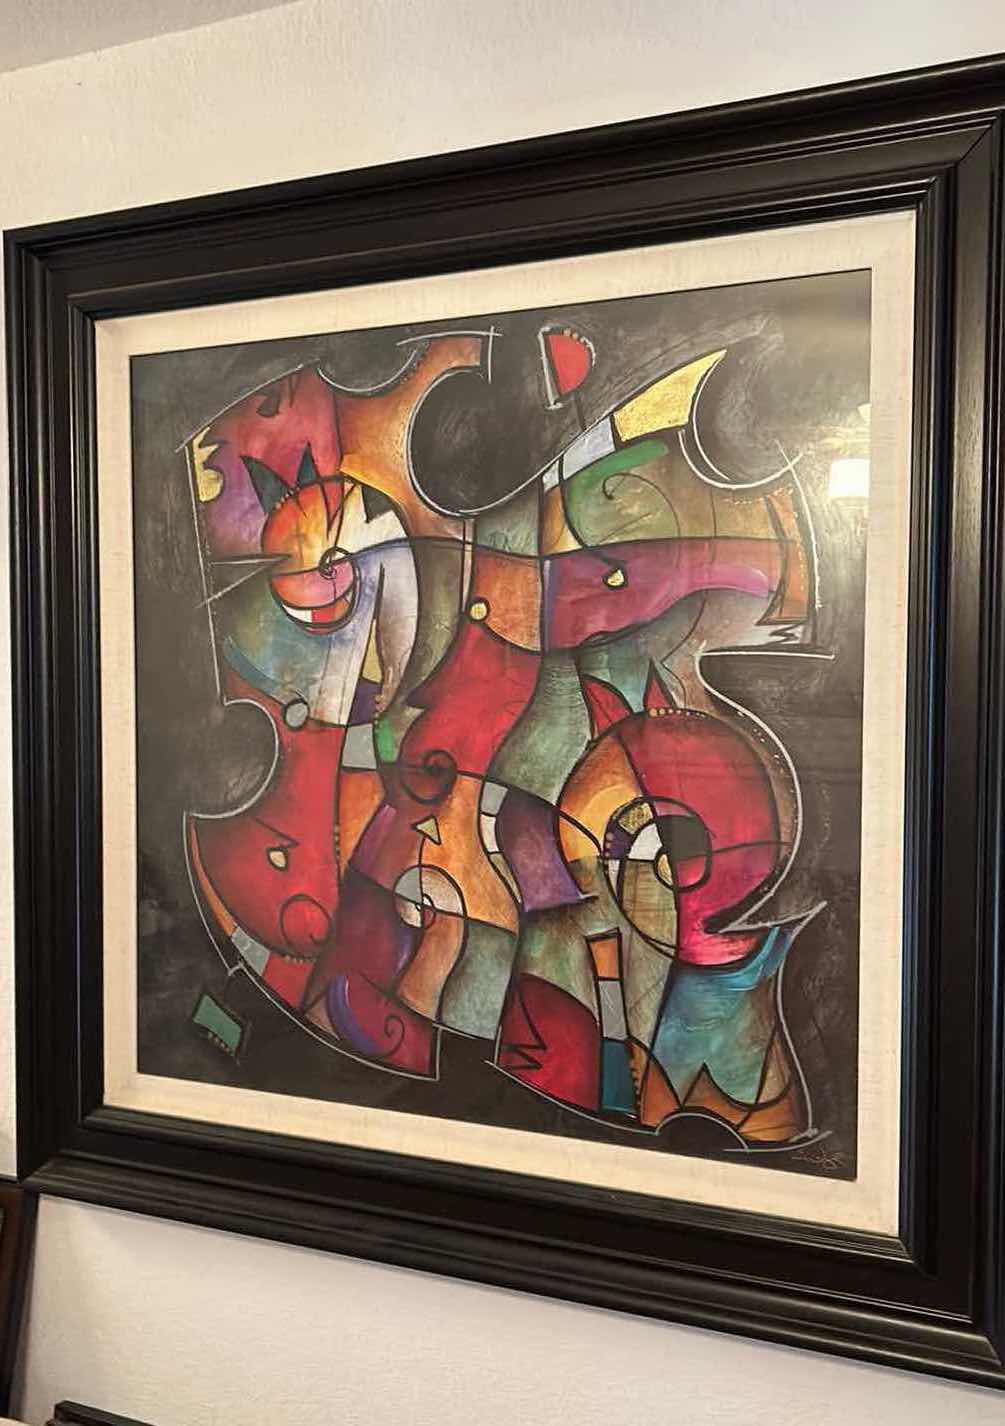 Photo 5 of SIGNED COLORFUL ABSTRACT ARTWORK BY ERIC WAUGH FRAMED 47 1/2” x 47 1/2”